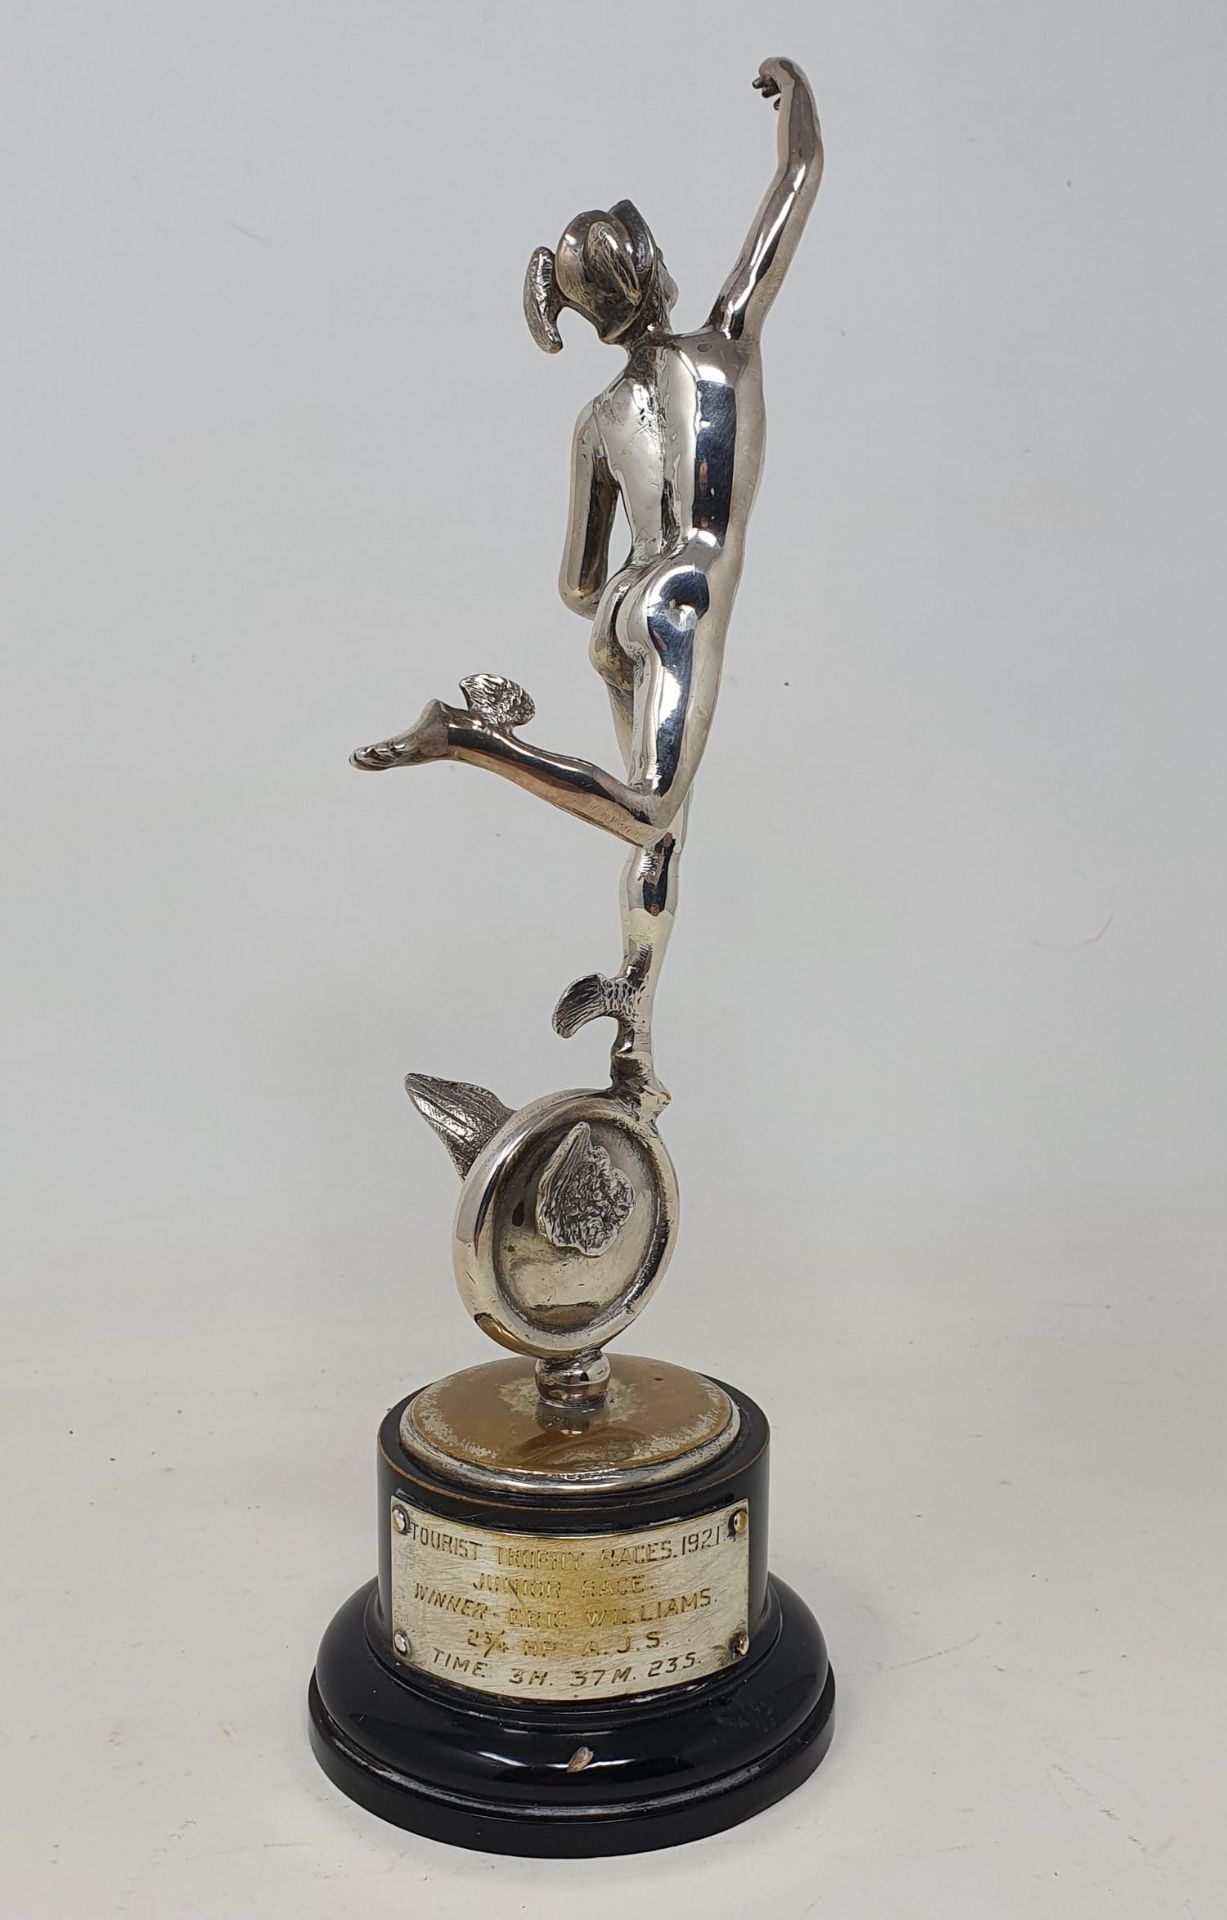 An Isle of Man TT silver replica trophy, the plaque inscribed 'TOURIST TROPHY RACES 1921 JUNIOR RACE